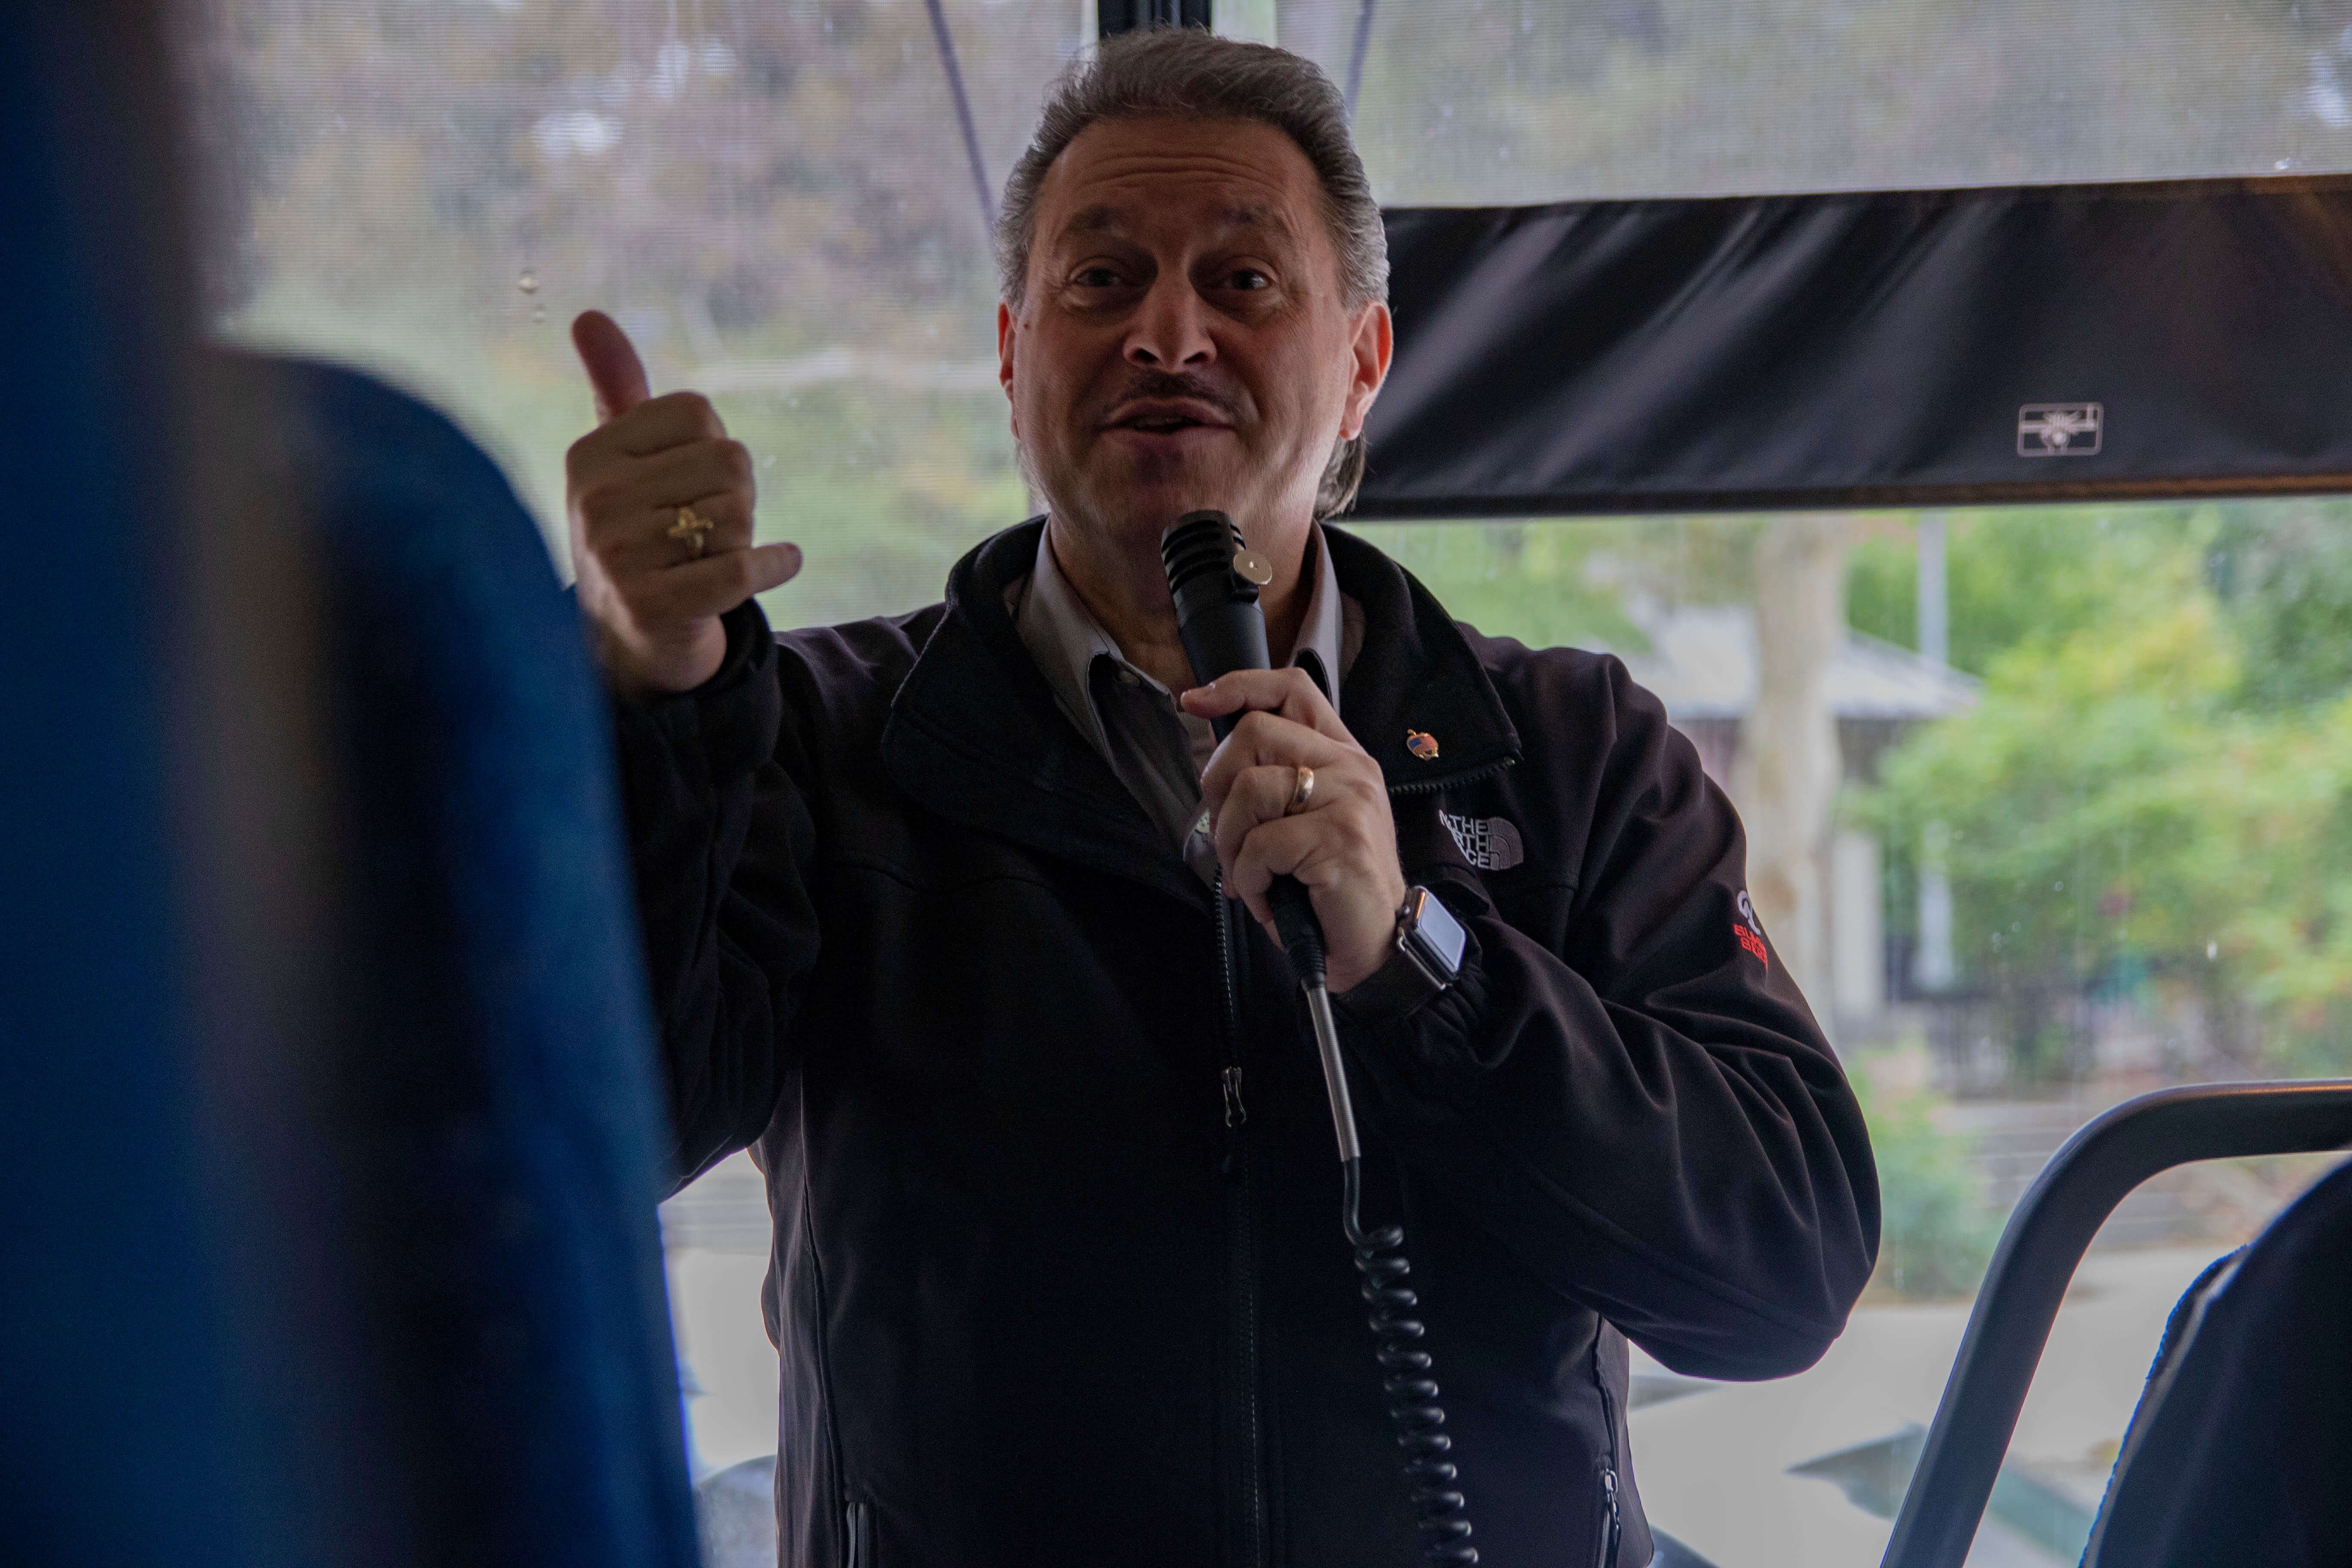 Senator Joe Addabbo speaks to protestors shortly after they have boarded the bus that will leave in front of developers home in Midwood. "We need the mayor to listen to our credible arguments about our safety and the future of our children," said Addabbo. 